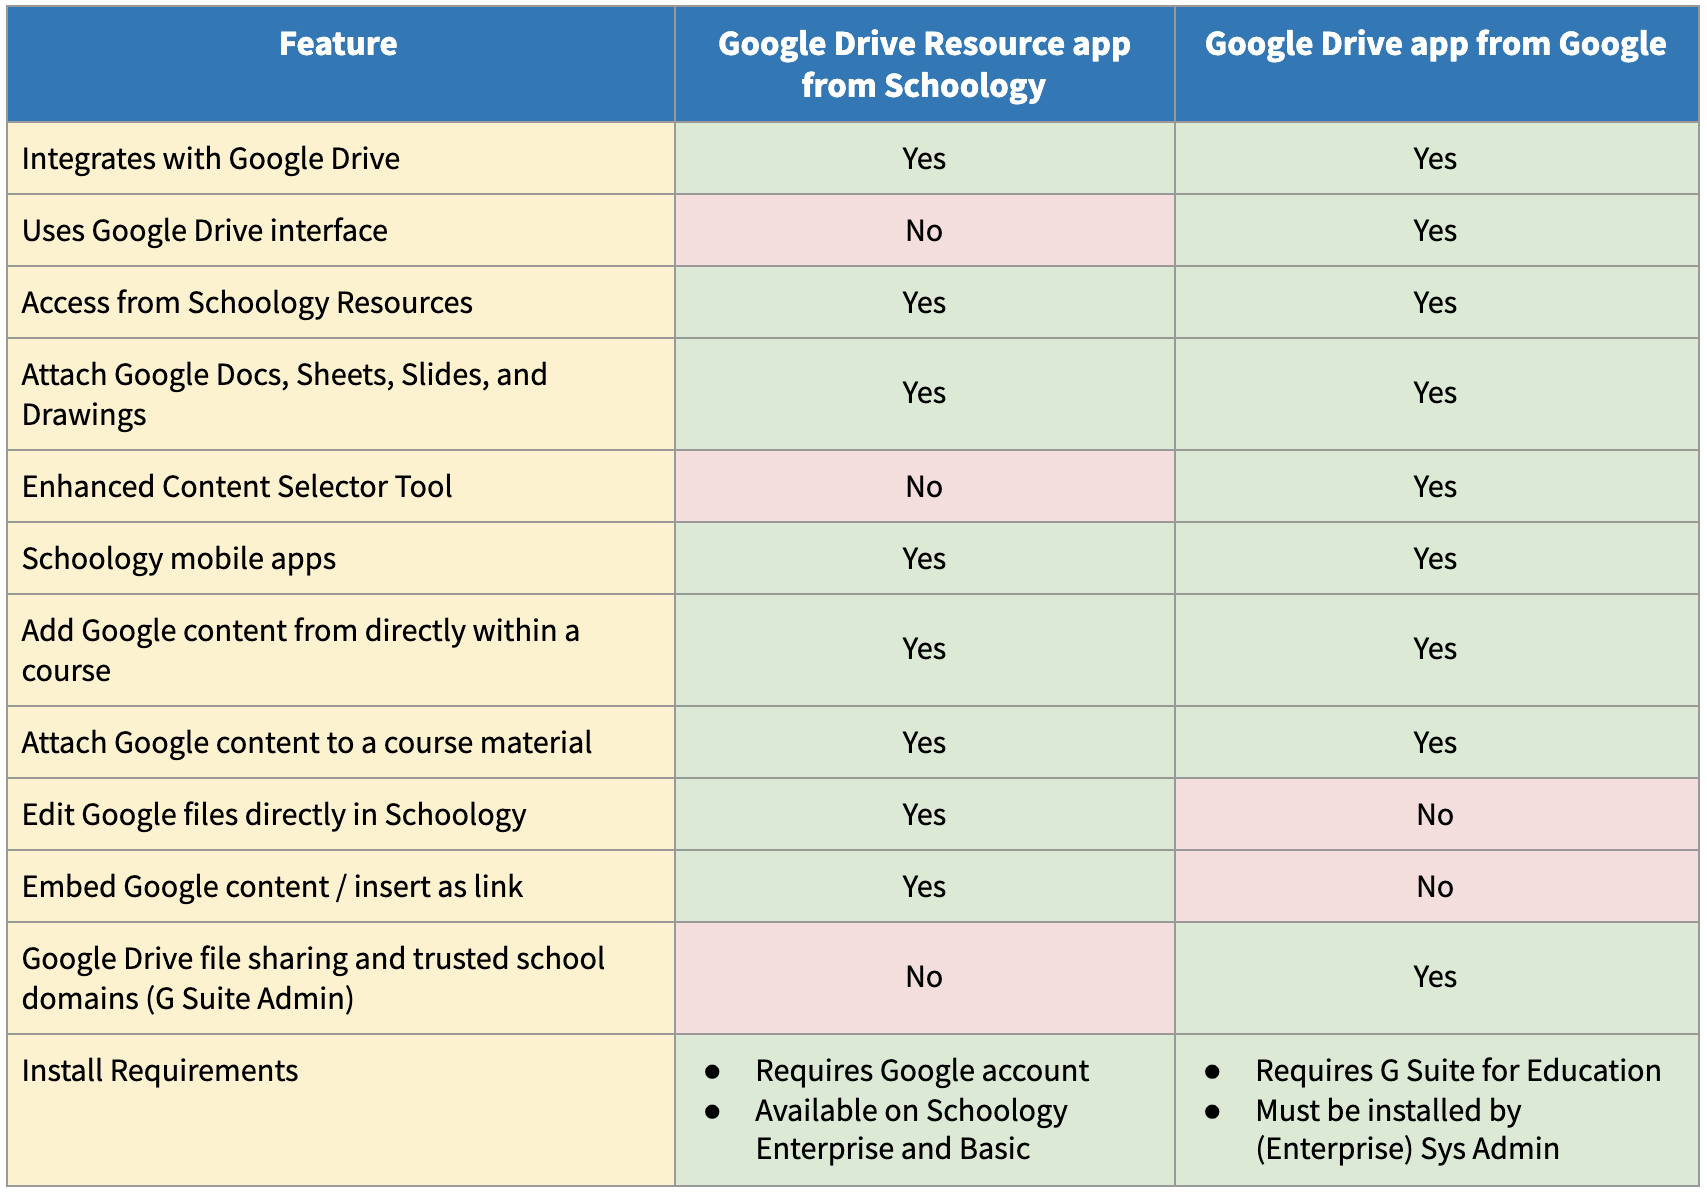 Comparison chart between Schoology app for Google Drive and the Google Drive app.